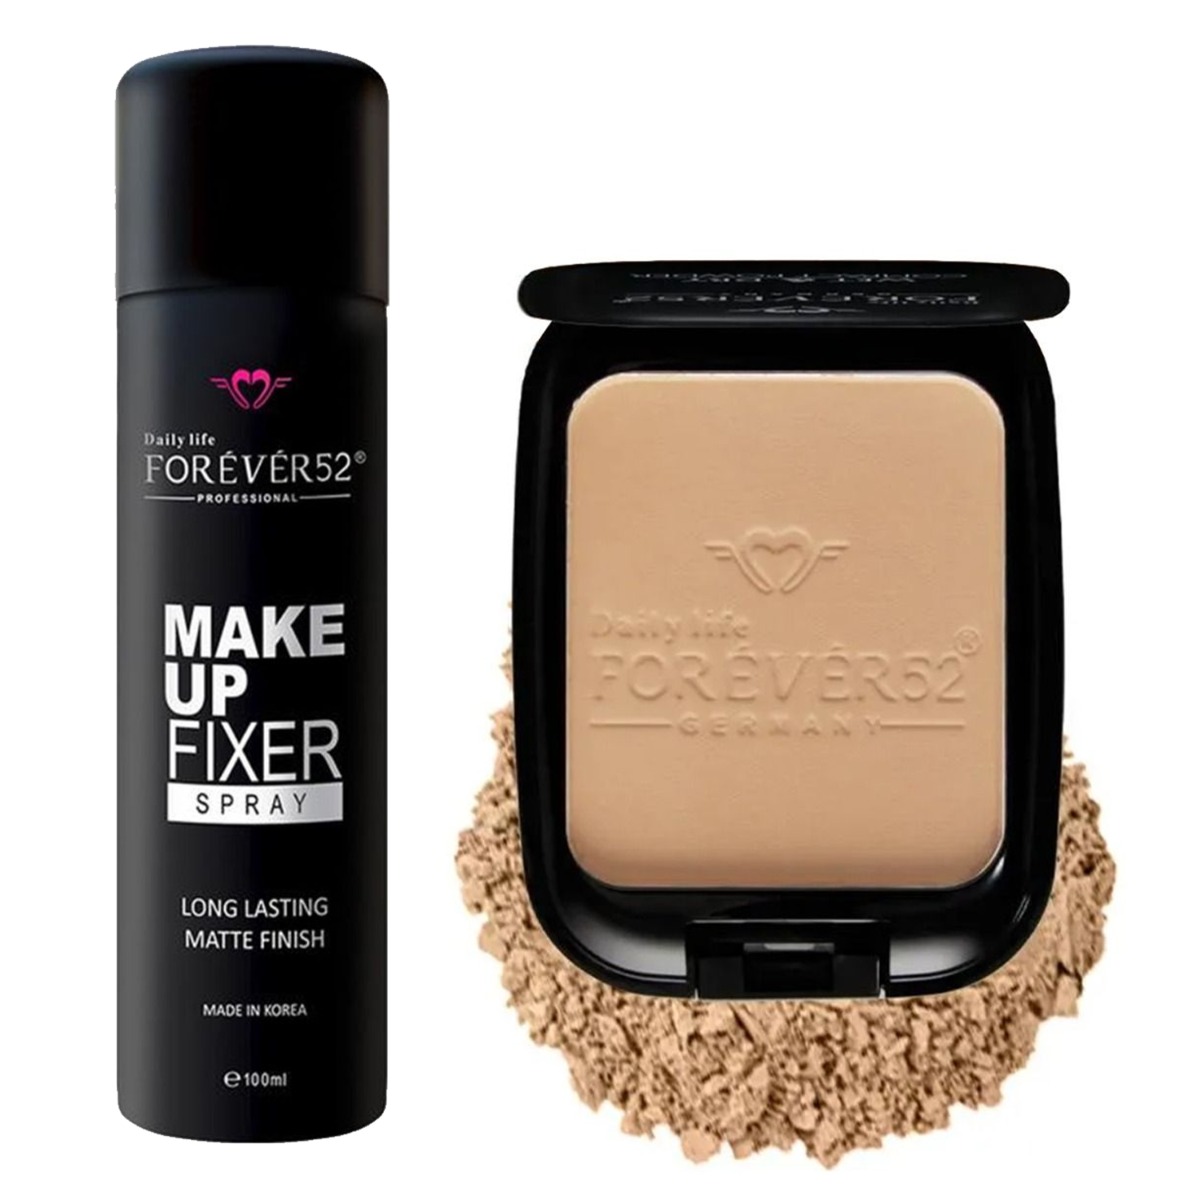 Forever52 Makeup Fixer Spray Long lasting and Matte Finish, 100ml & Wet & Dry Compact WD006, 12gm